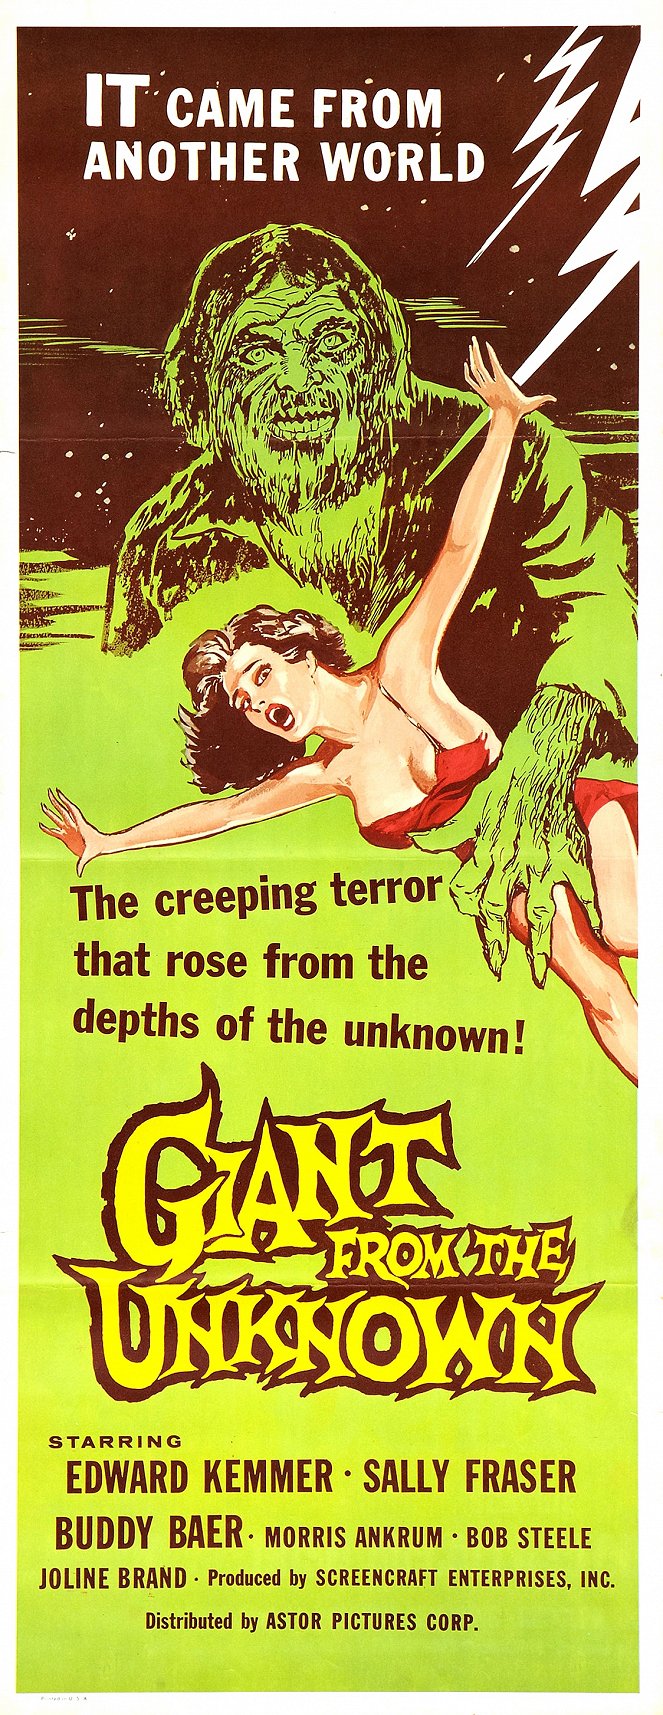 Giant from the Unknown - Posters